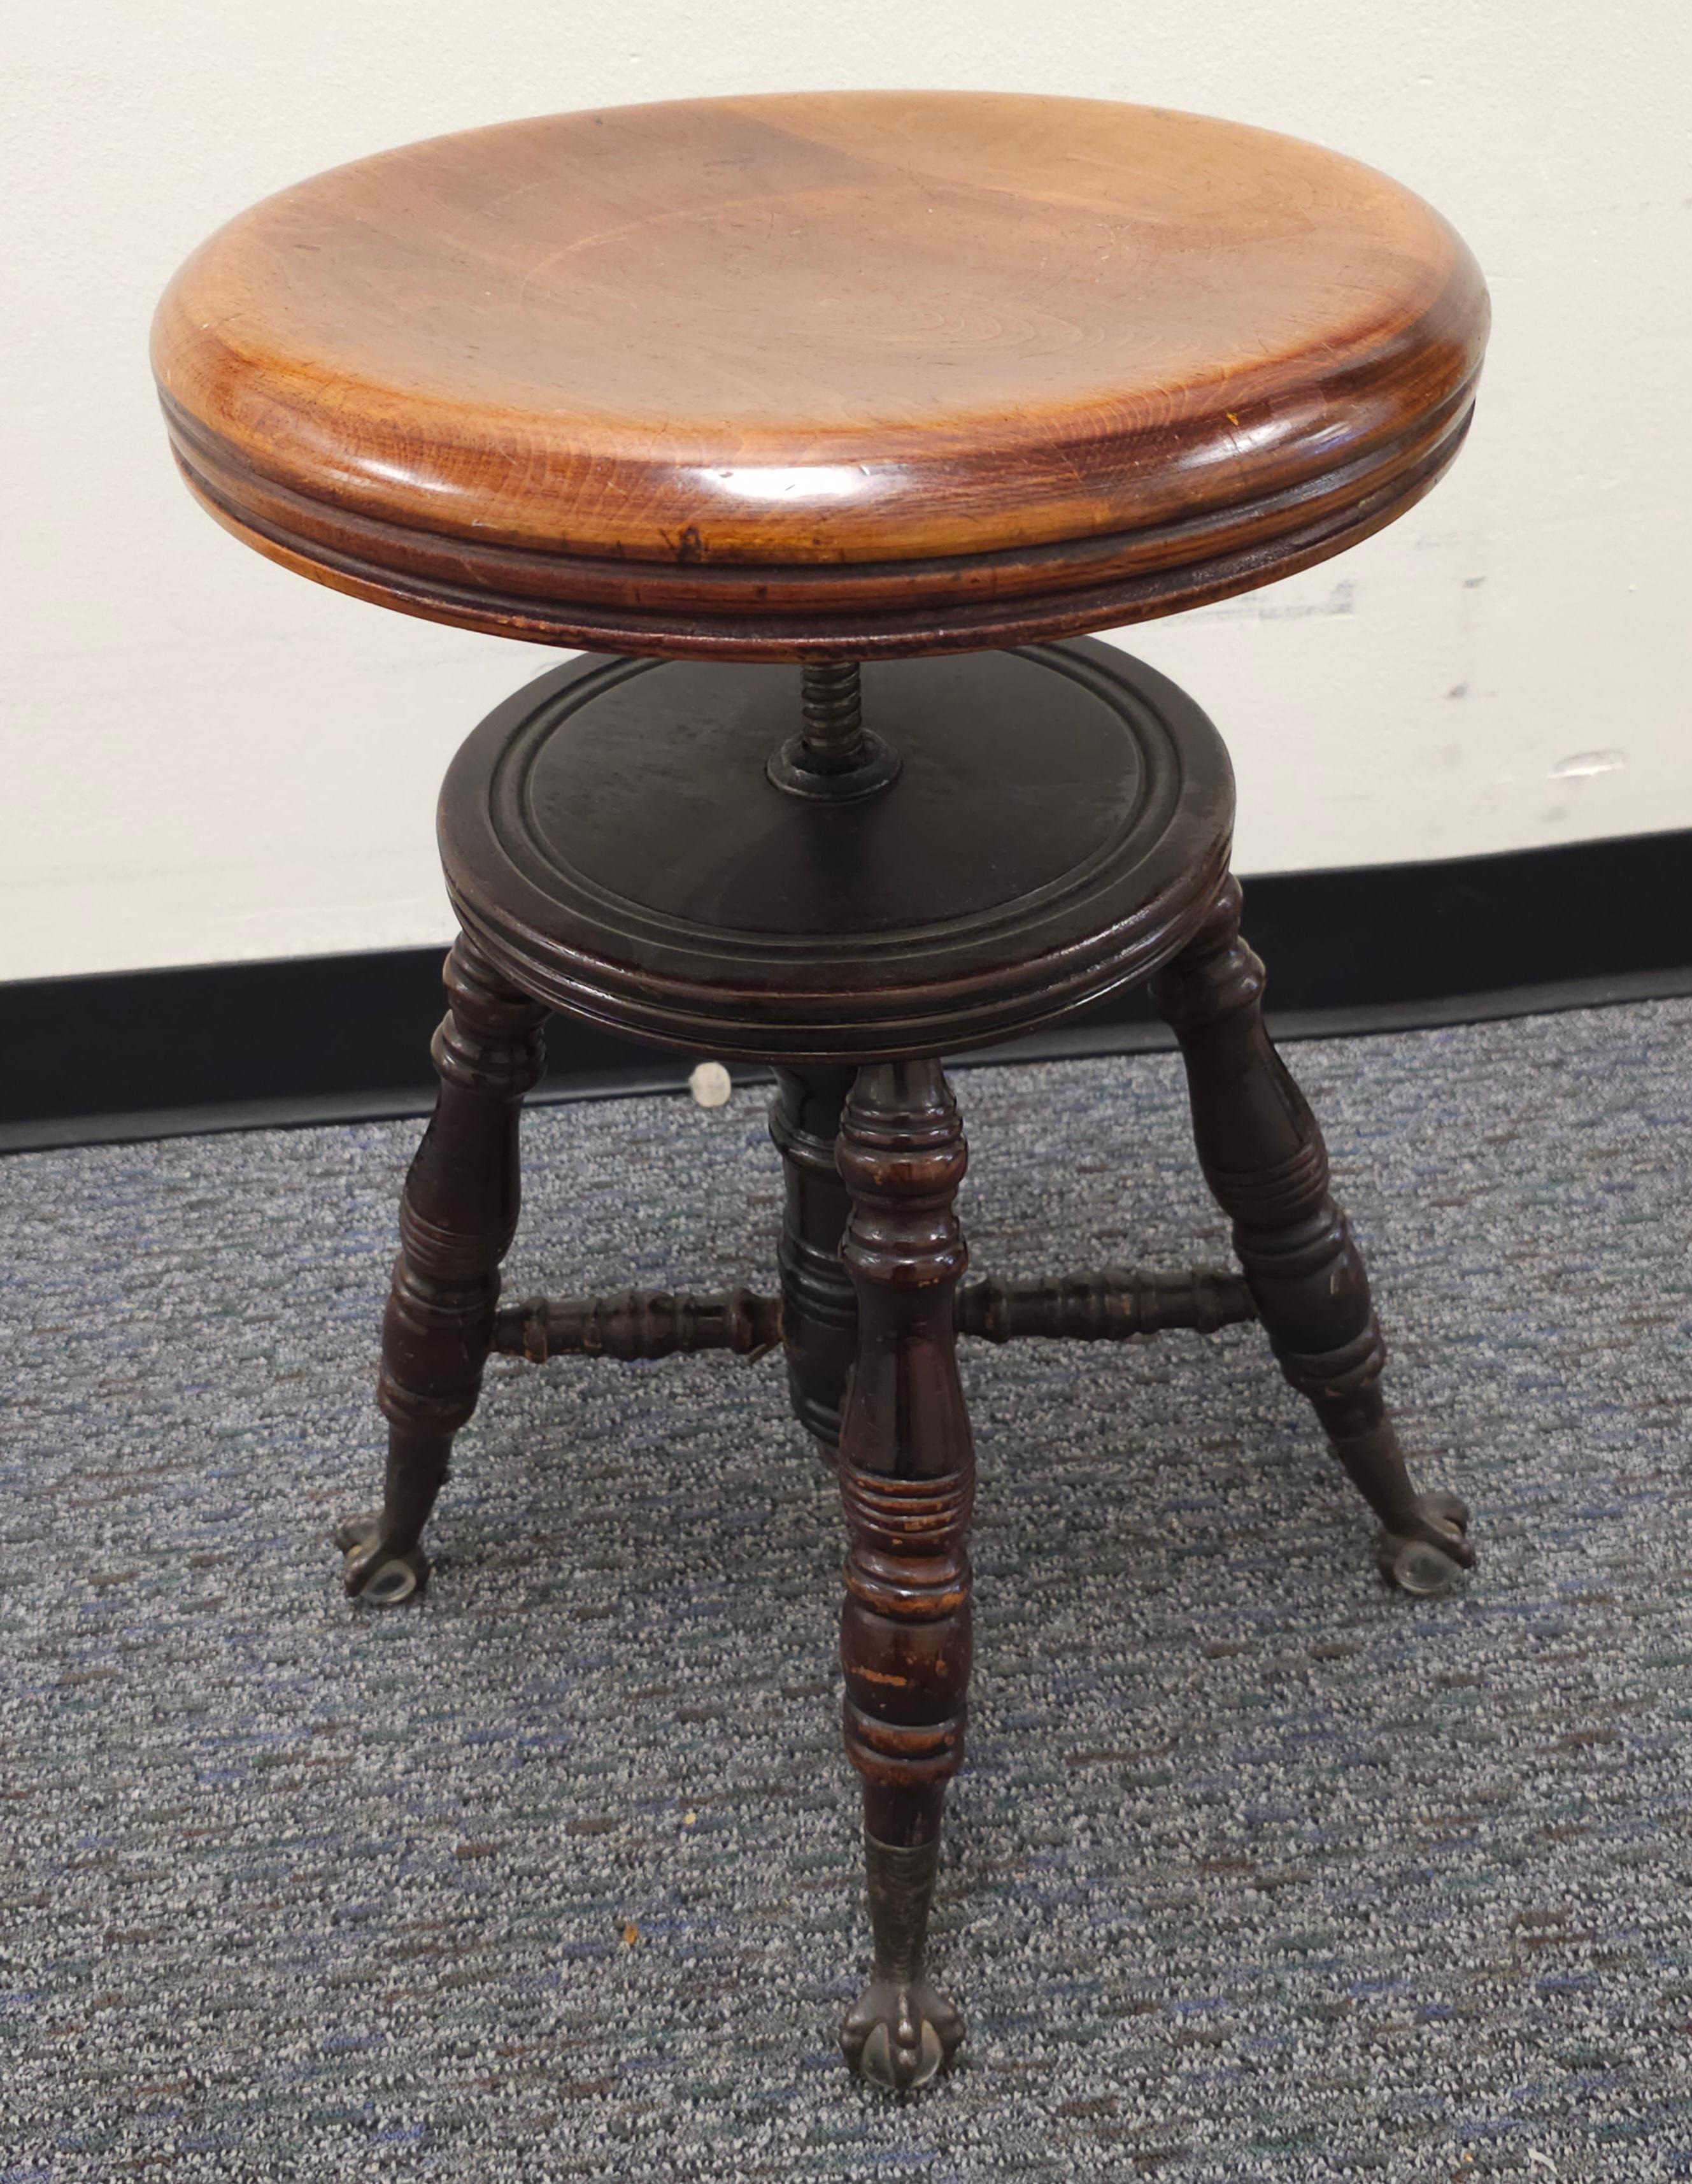 Mid-19th Century Vicotian  Mahogany and Iron Piano Stool with Ball Claw Feet by Charles Parker. Measures 14